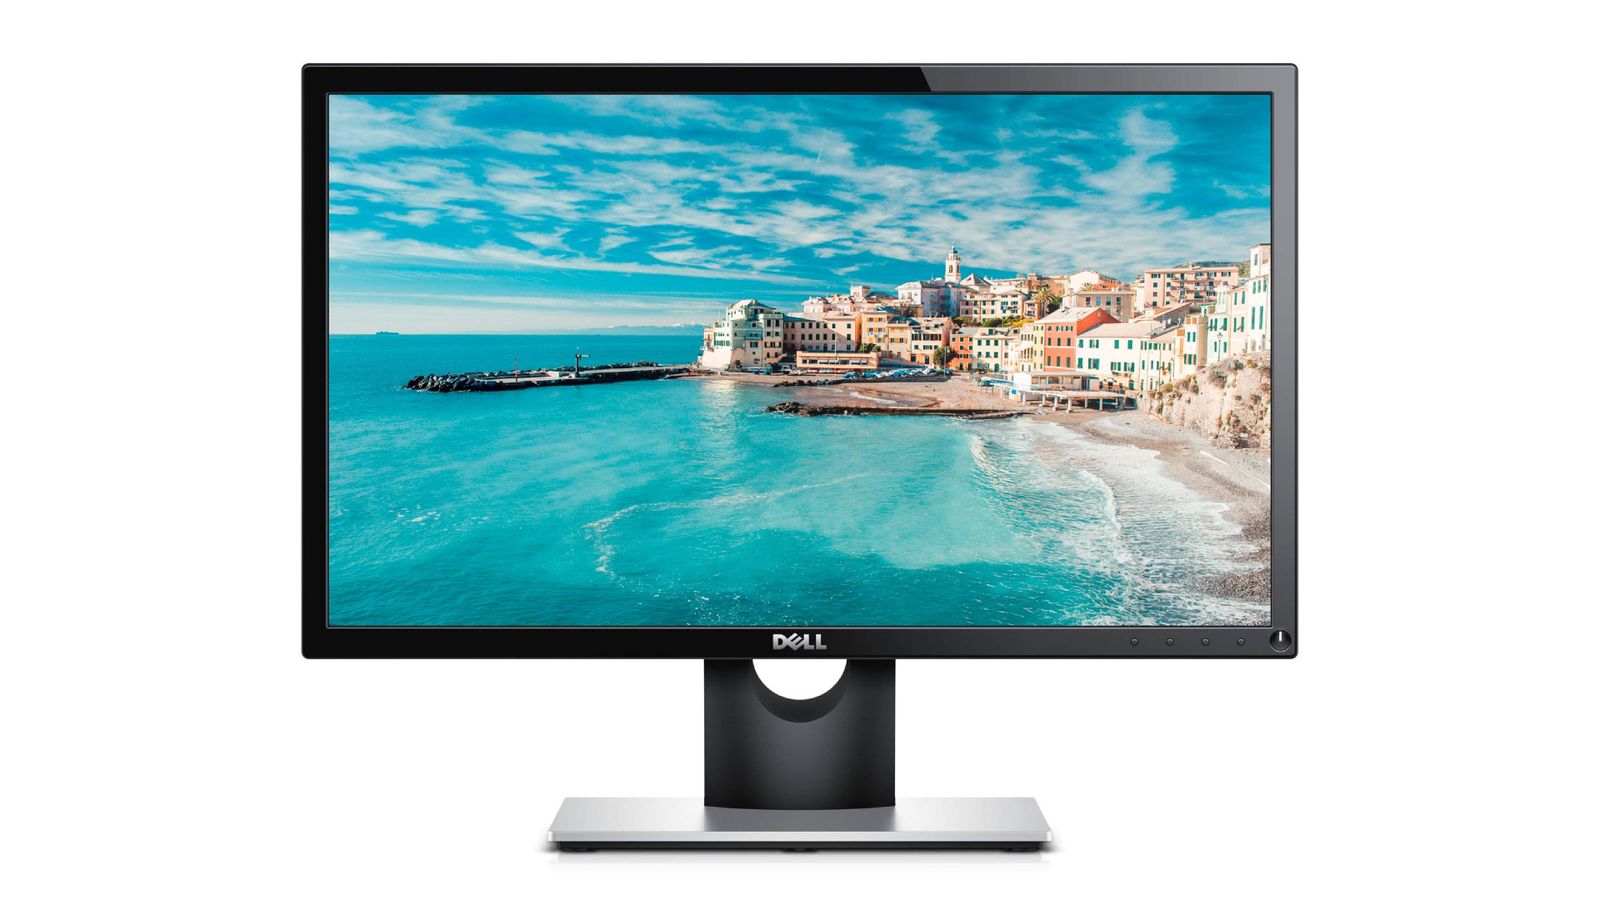 Dell SE2216H product image of a black and grey monitor with a beachside town on the display.